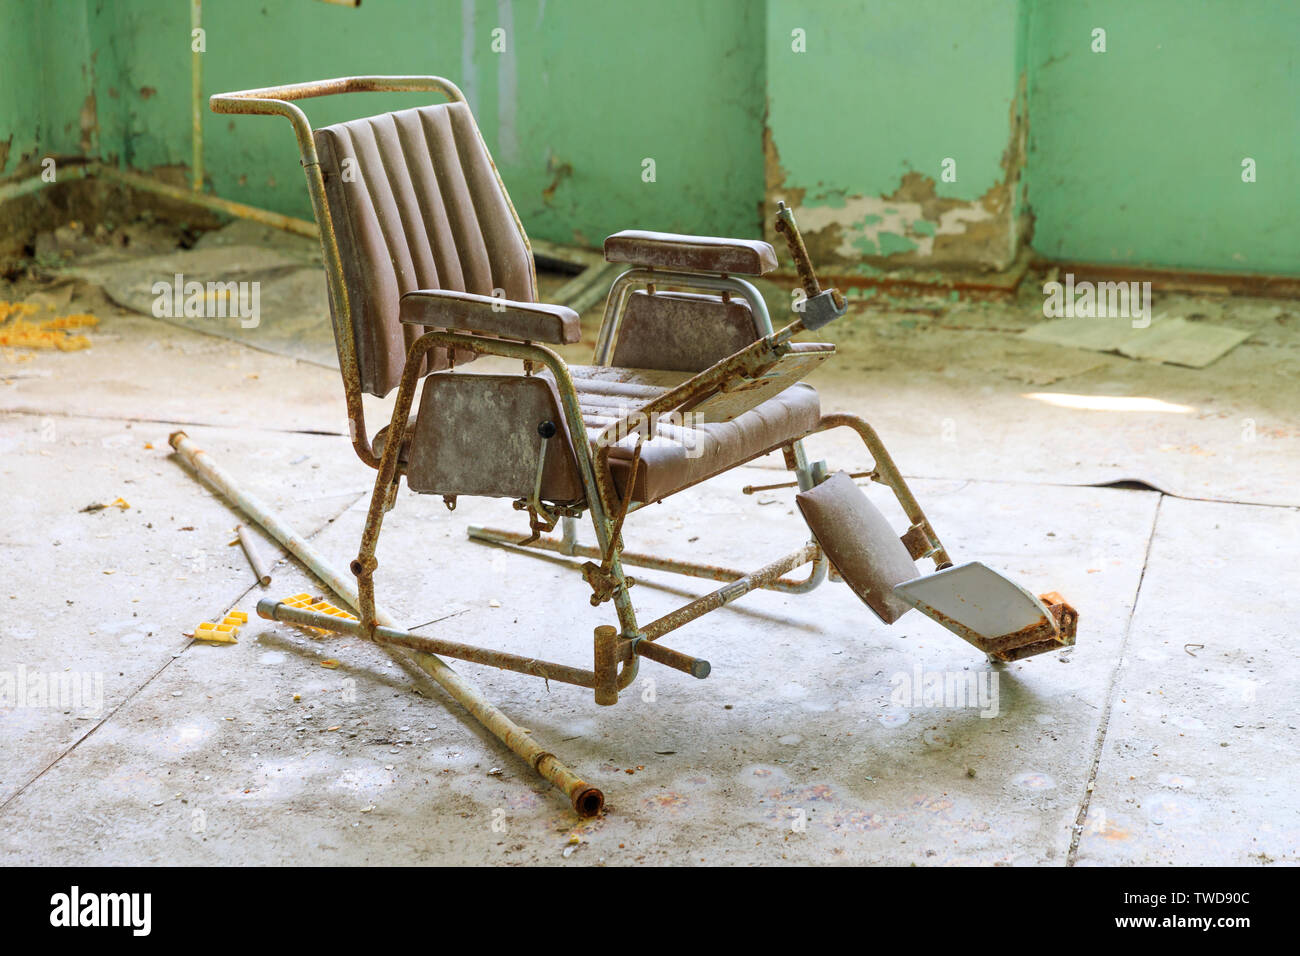 Eastern Europe, Ukraine, Pripyat, Chernobyl. The Hospital MsCh-126 (medical-sanitary unit). Chair with leg supports. Stock Photo